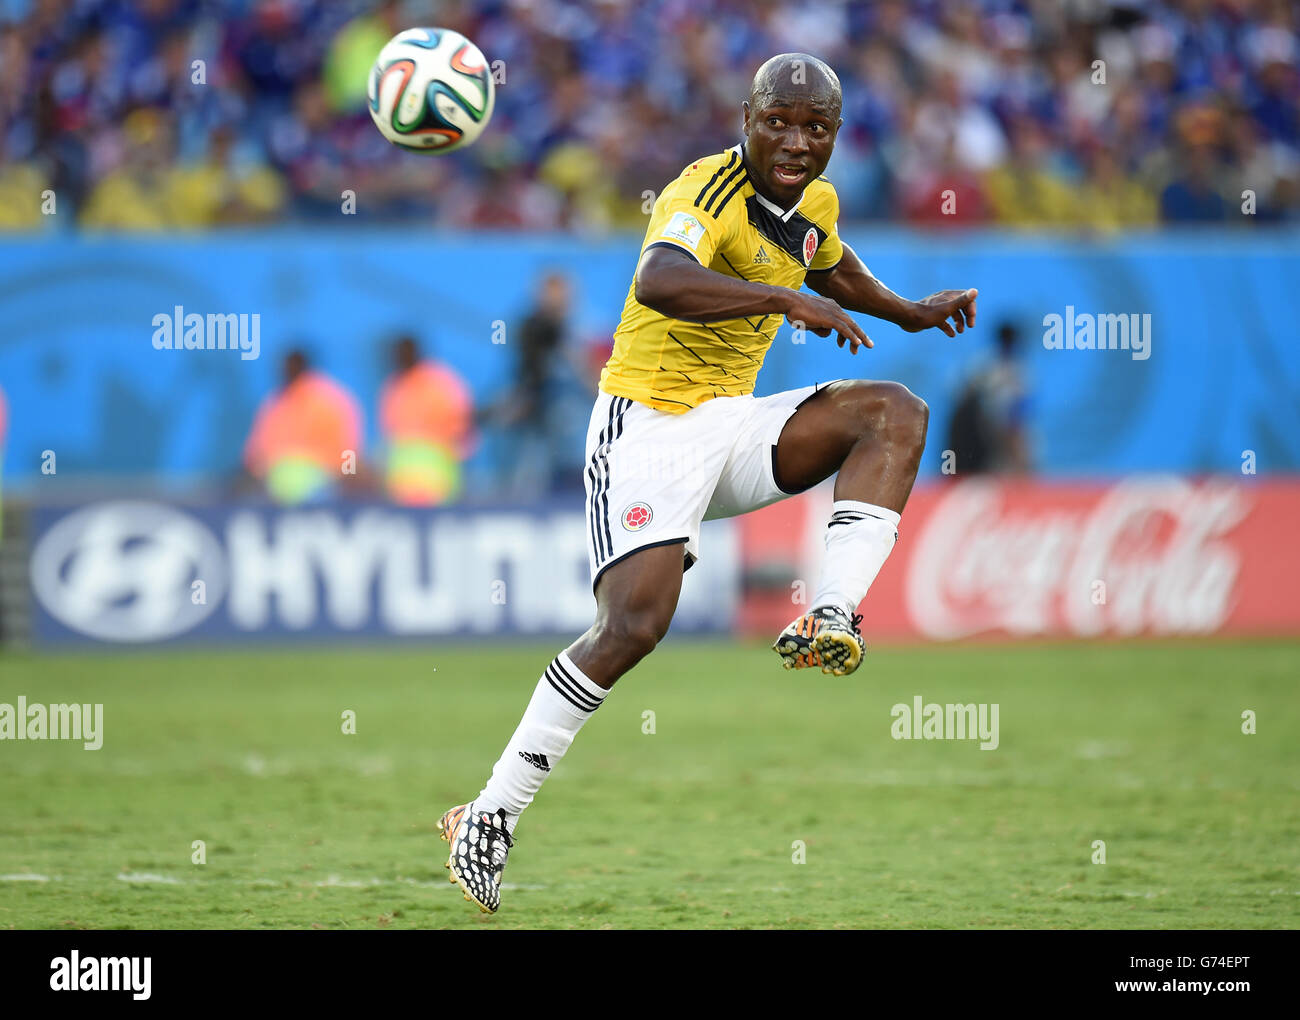 Soccer - FIFA World Cup 2014 - Group C - Japan v Colombia - Arena Pantanal. Colombia's Pablo Armero Stock Photo